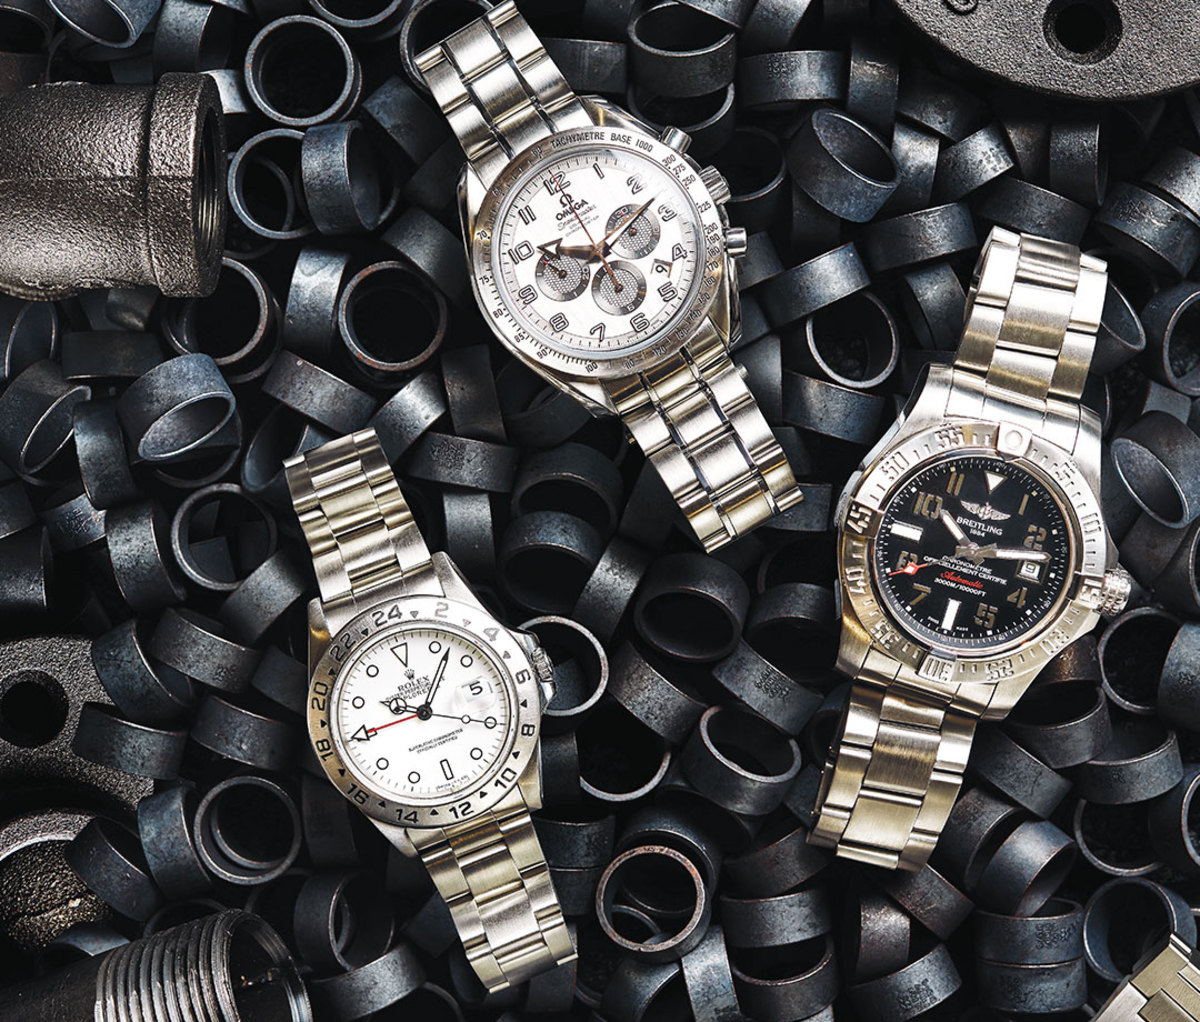 pre-owned watches can cost as much as $50,000